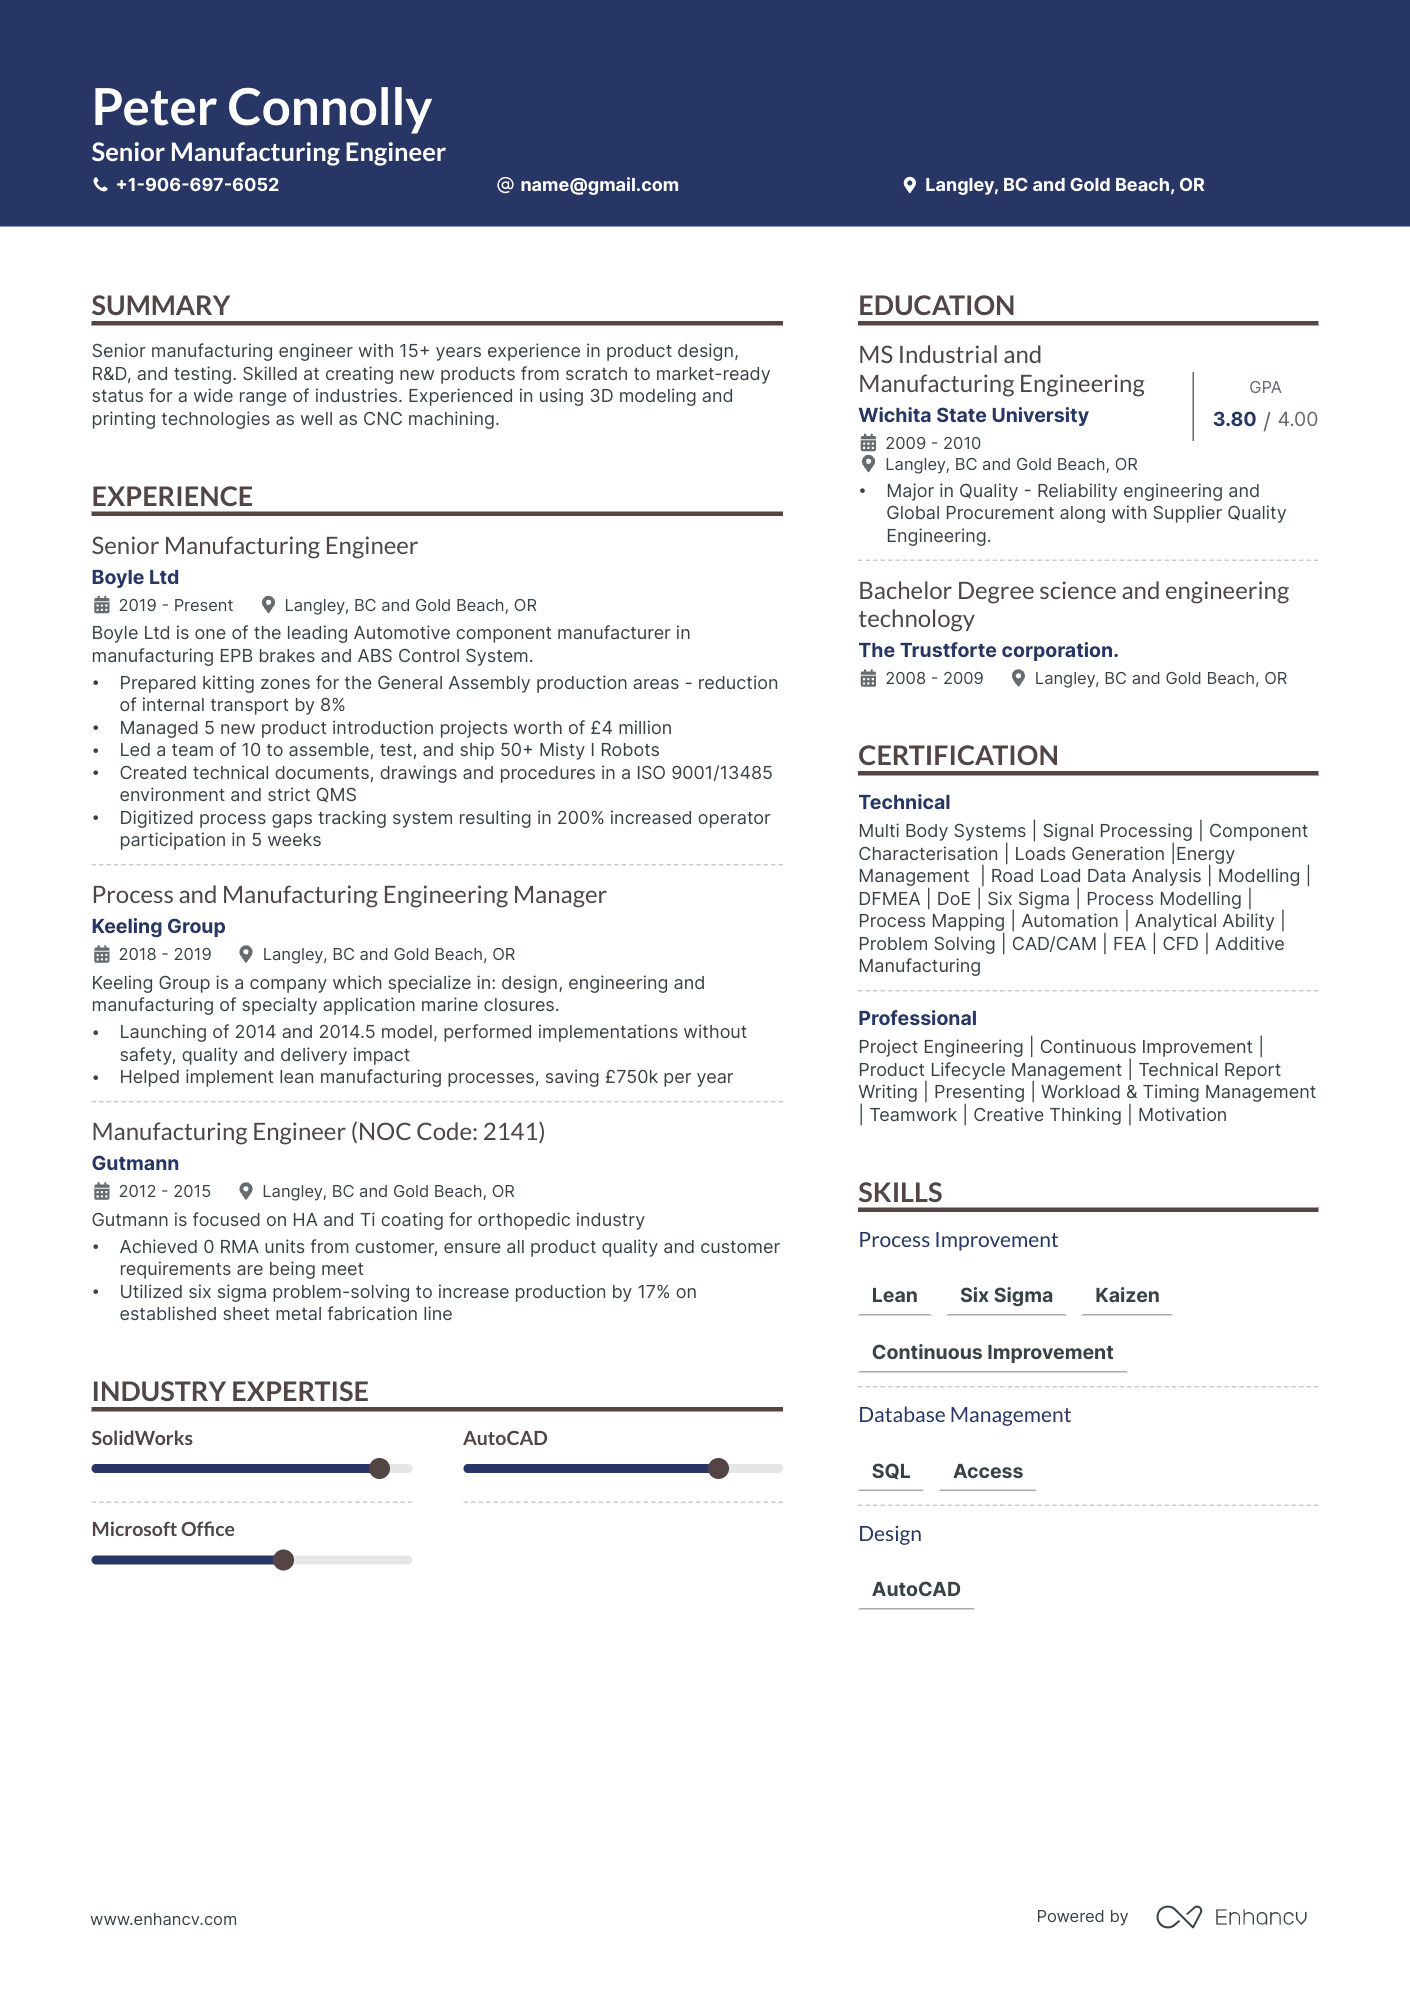 Manufacturing Engineer resume example